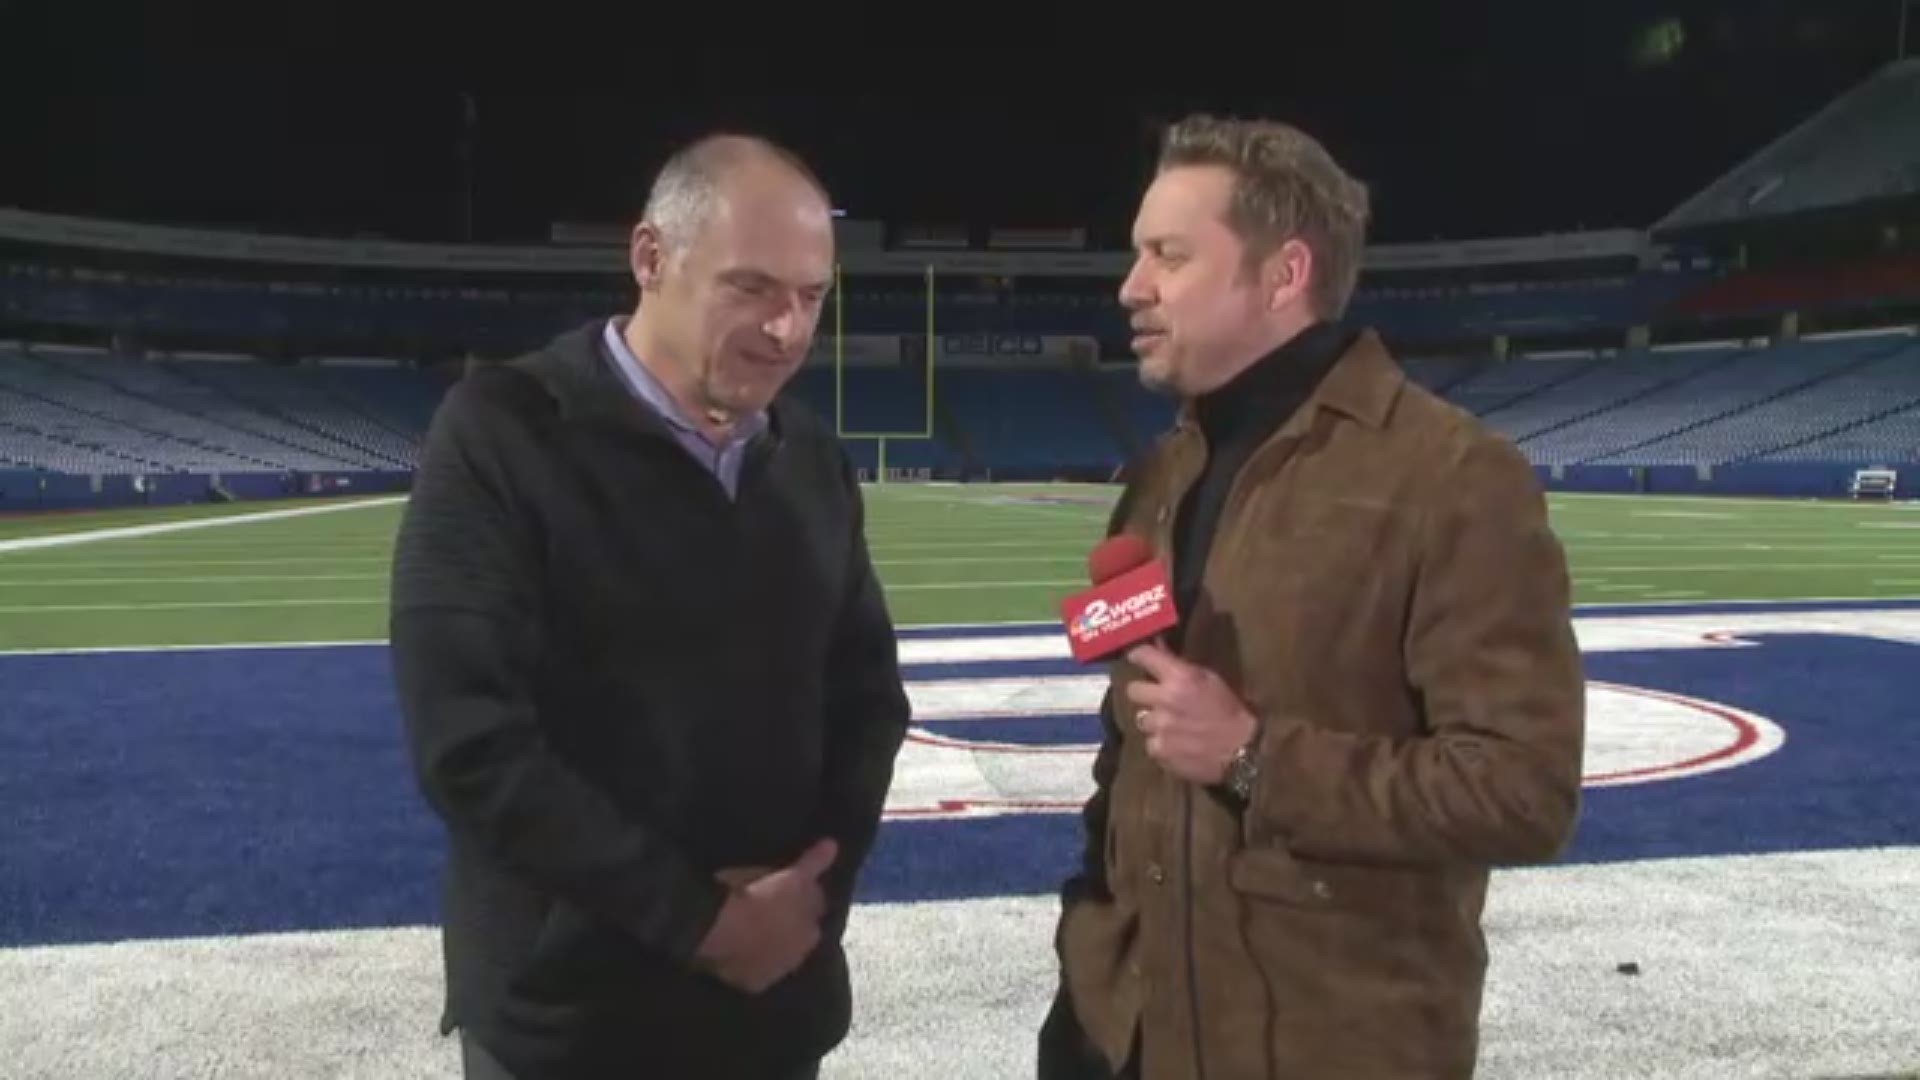 WGRZ's Adam Benigni is joined by Vic Carucci of the Buffalo News after the Bills 24-9 win over the Washington Redskins.